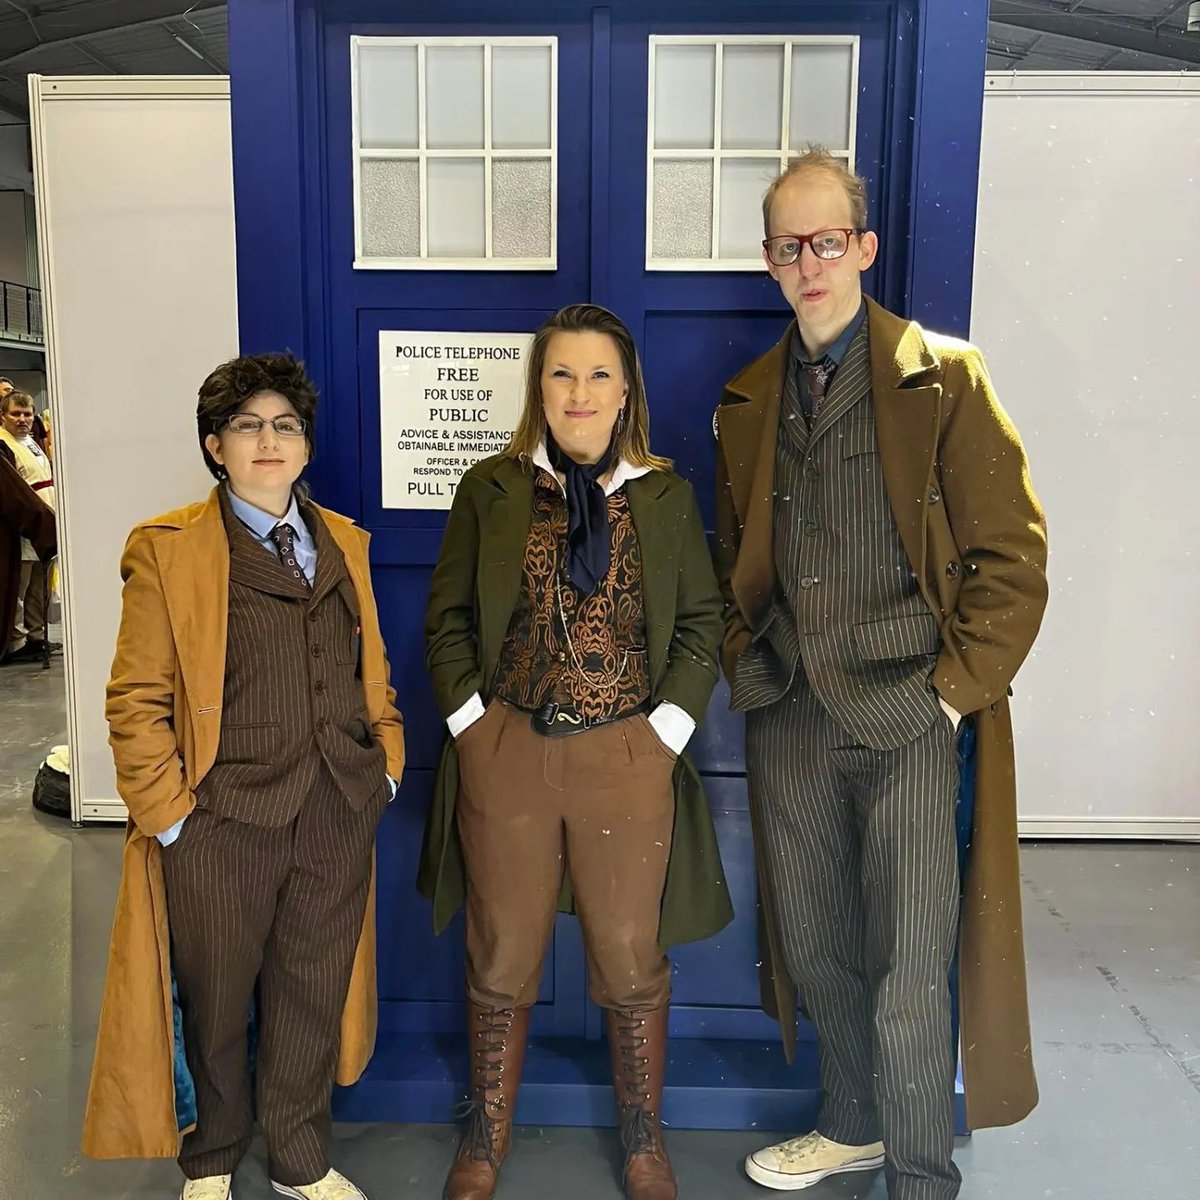 Cool Pic sharing
.
Credit from instagram.com/the.winter.doc…
.
8th doctor coat and the first 10th doctor cosplay from @cosdaddycostume 
.
#cosdaddy #DoctorWho #DoctorWhoRankings2023